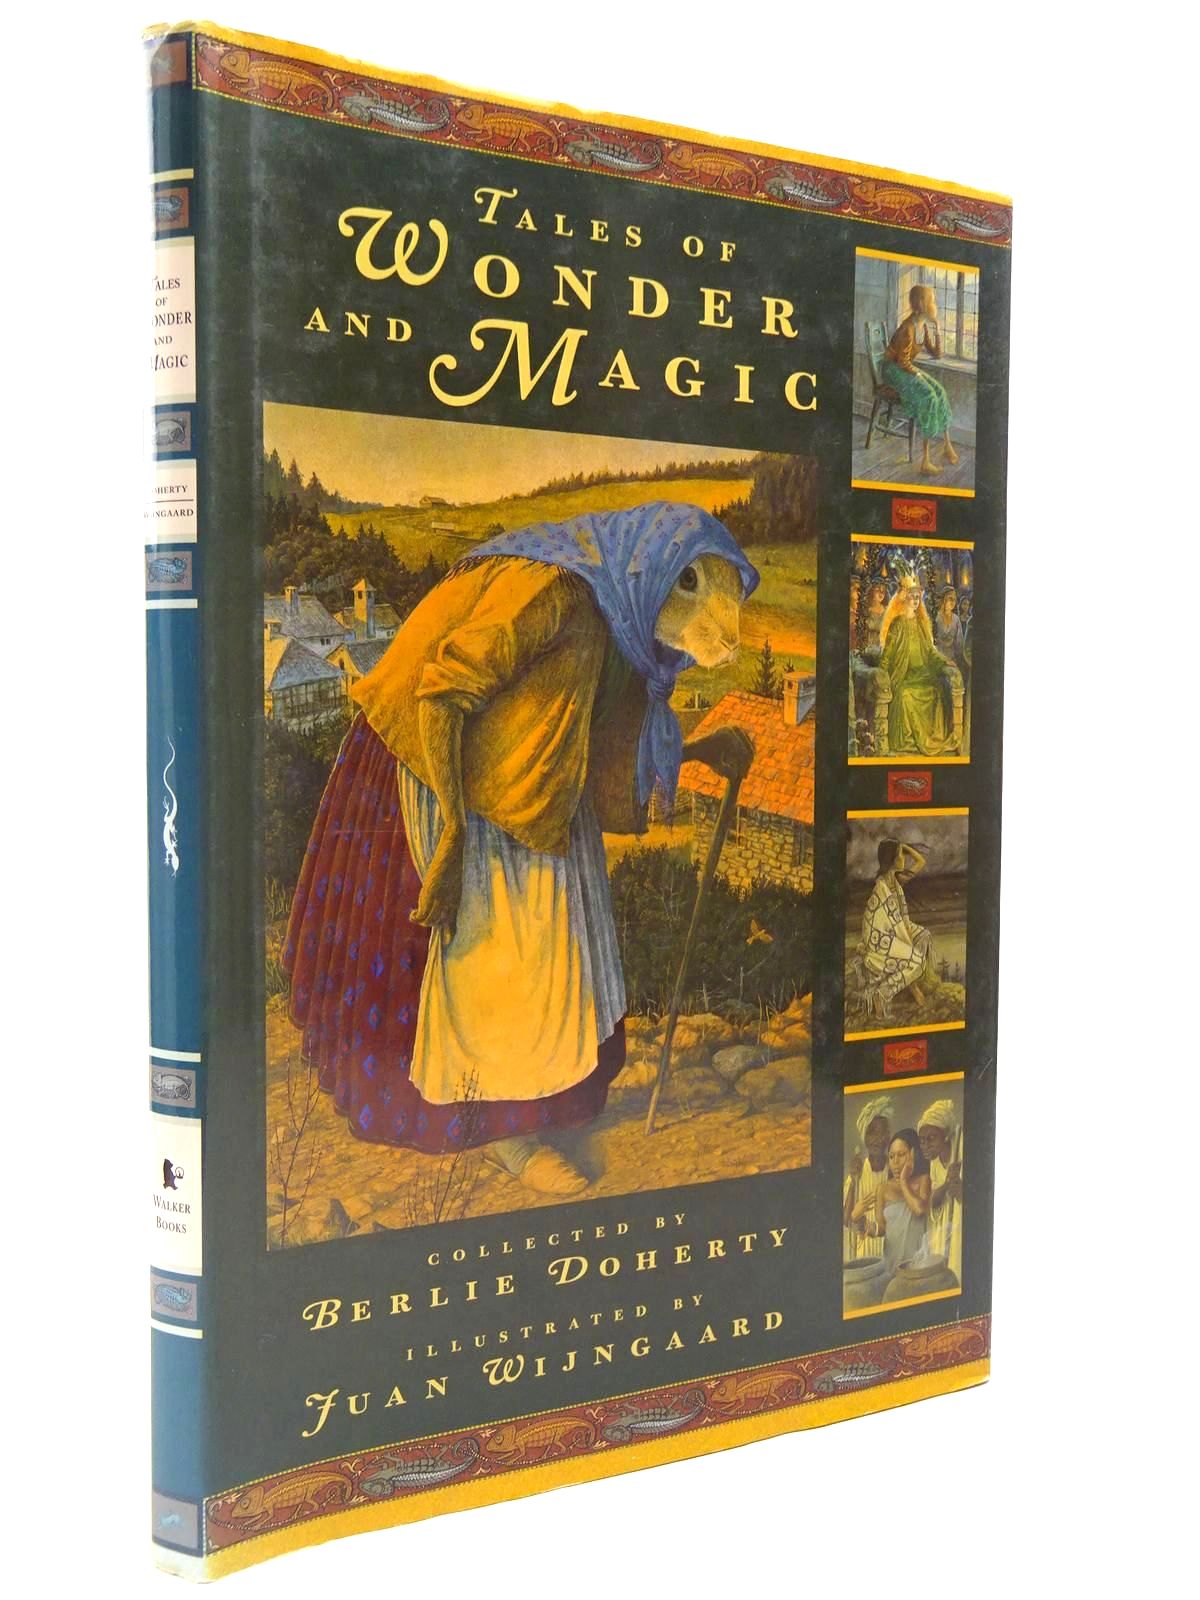 Photo of TALES OF WONDER AND MAGIC written by Doherty, Berlie illustrated by Wijngaard, Juan published by Walker Books (STOCK CODE: 2130007)  for sale by Stella & Rose's Books